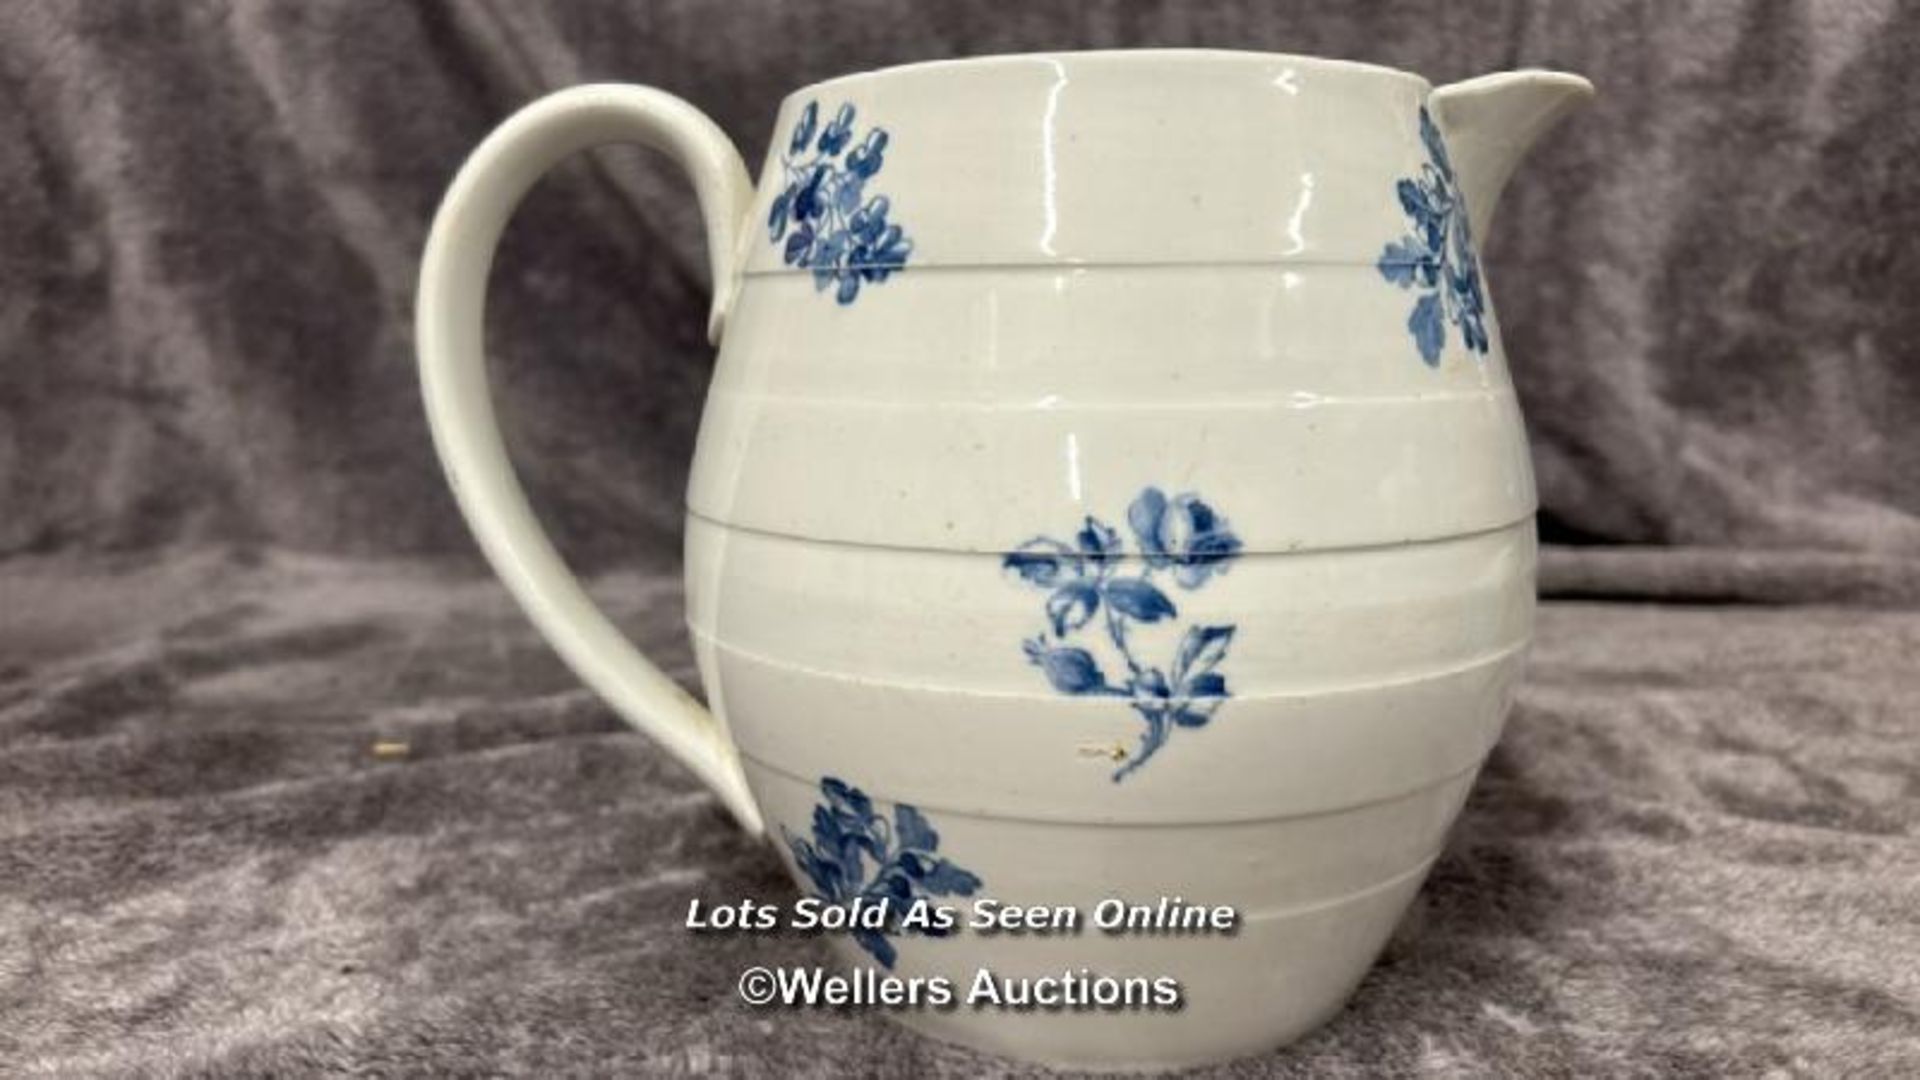 Two William Whiteley Queen Victoria longest reign mugs with one Royal Doulton King Edward VII mug - Image 9 of 10